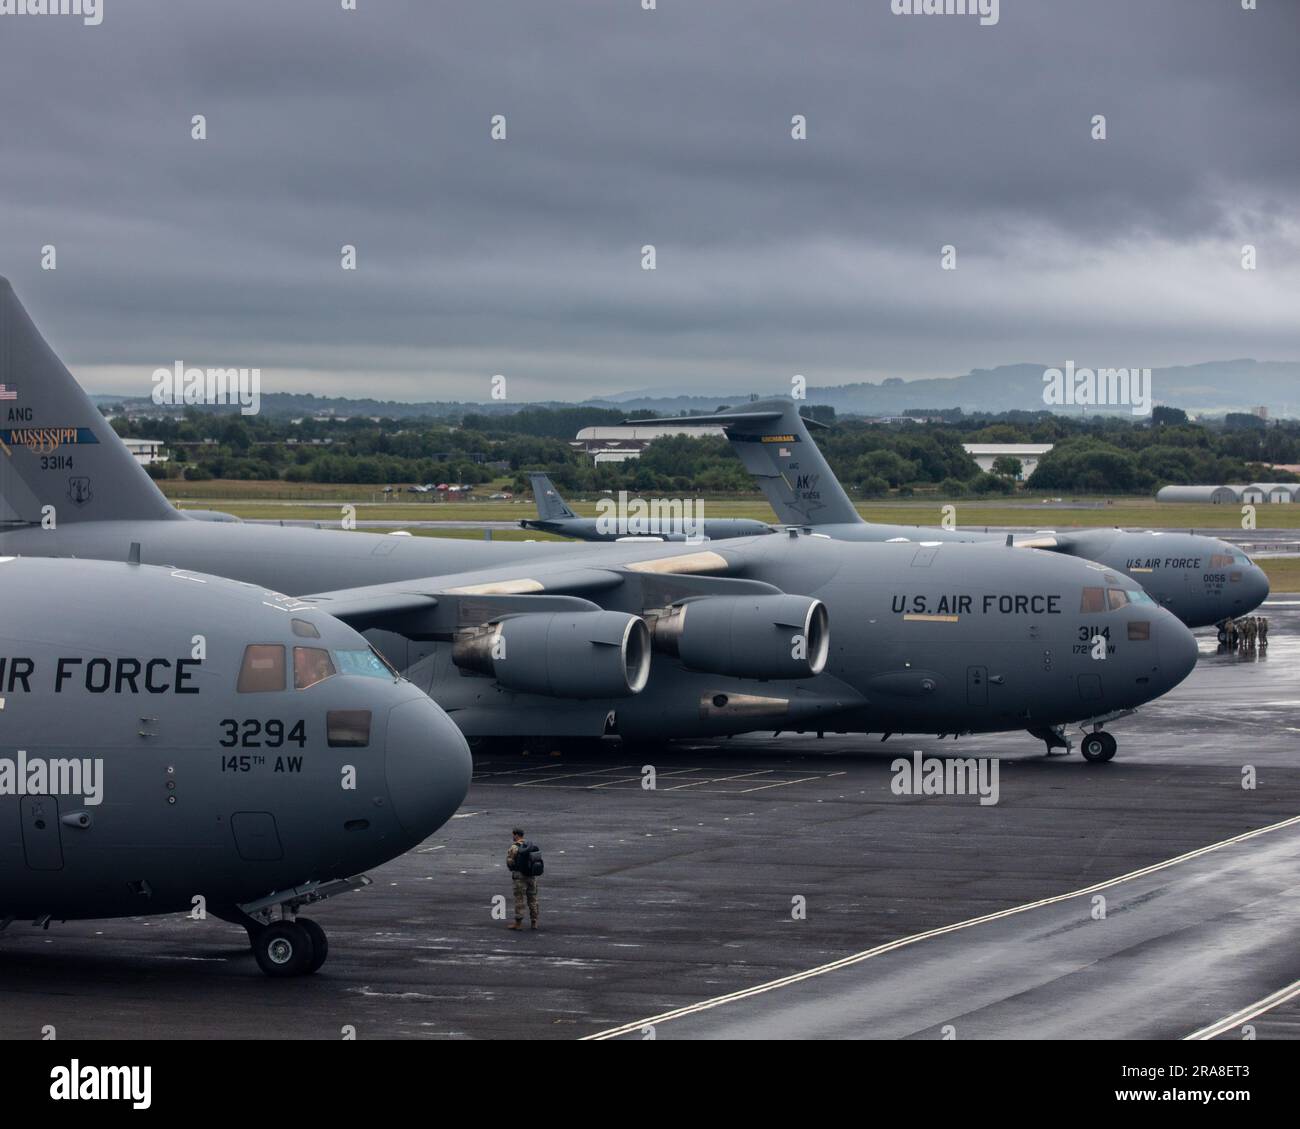 USAF C17 Globemaster IIIs at Prestwick International near Glasgow, operated by Air National Guard units 145th Air Wing and 172nd Air Wing. Stock Photo